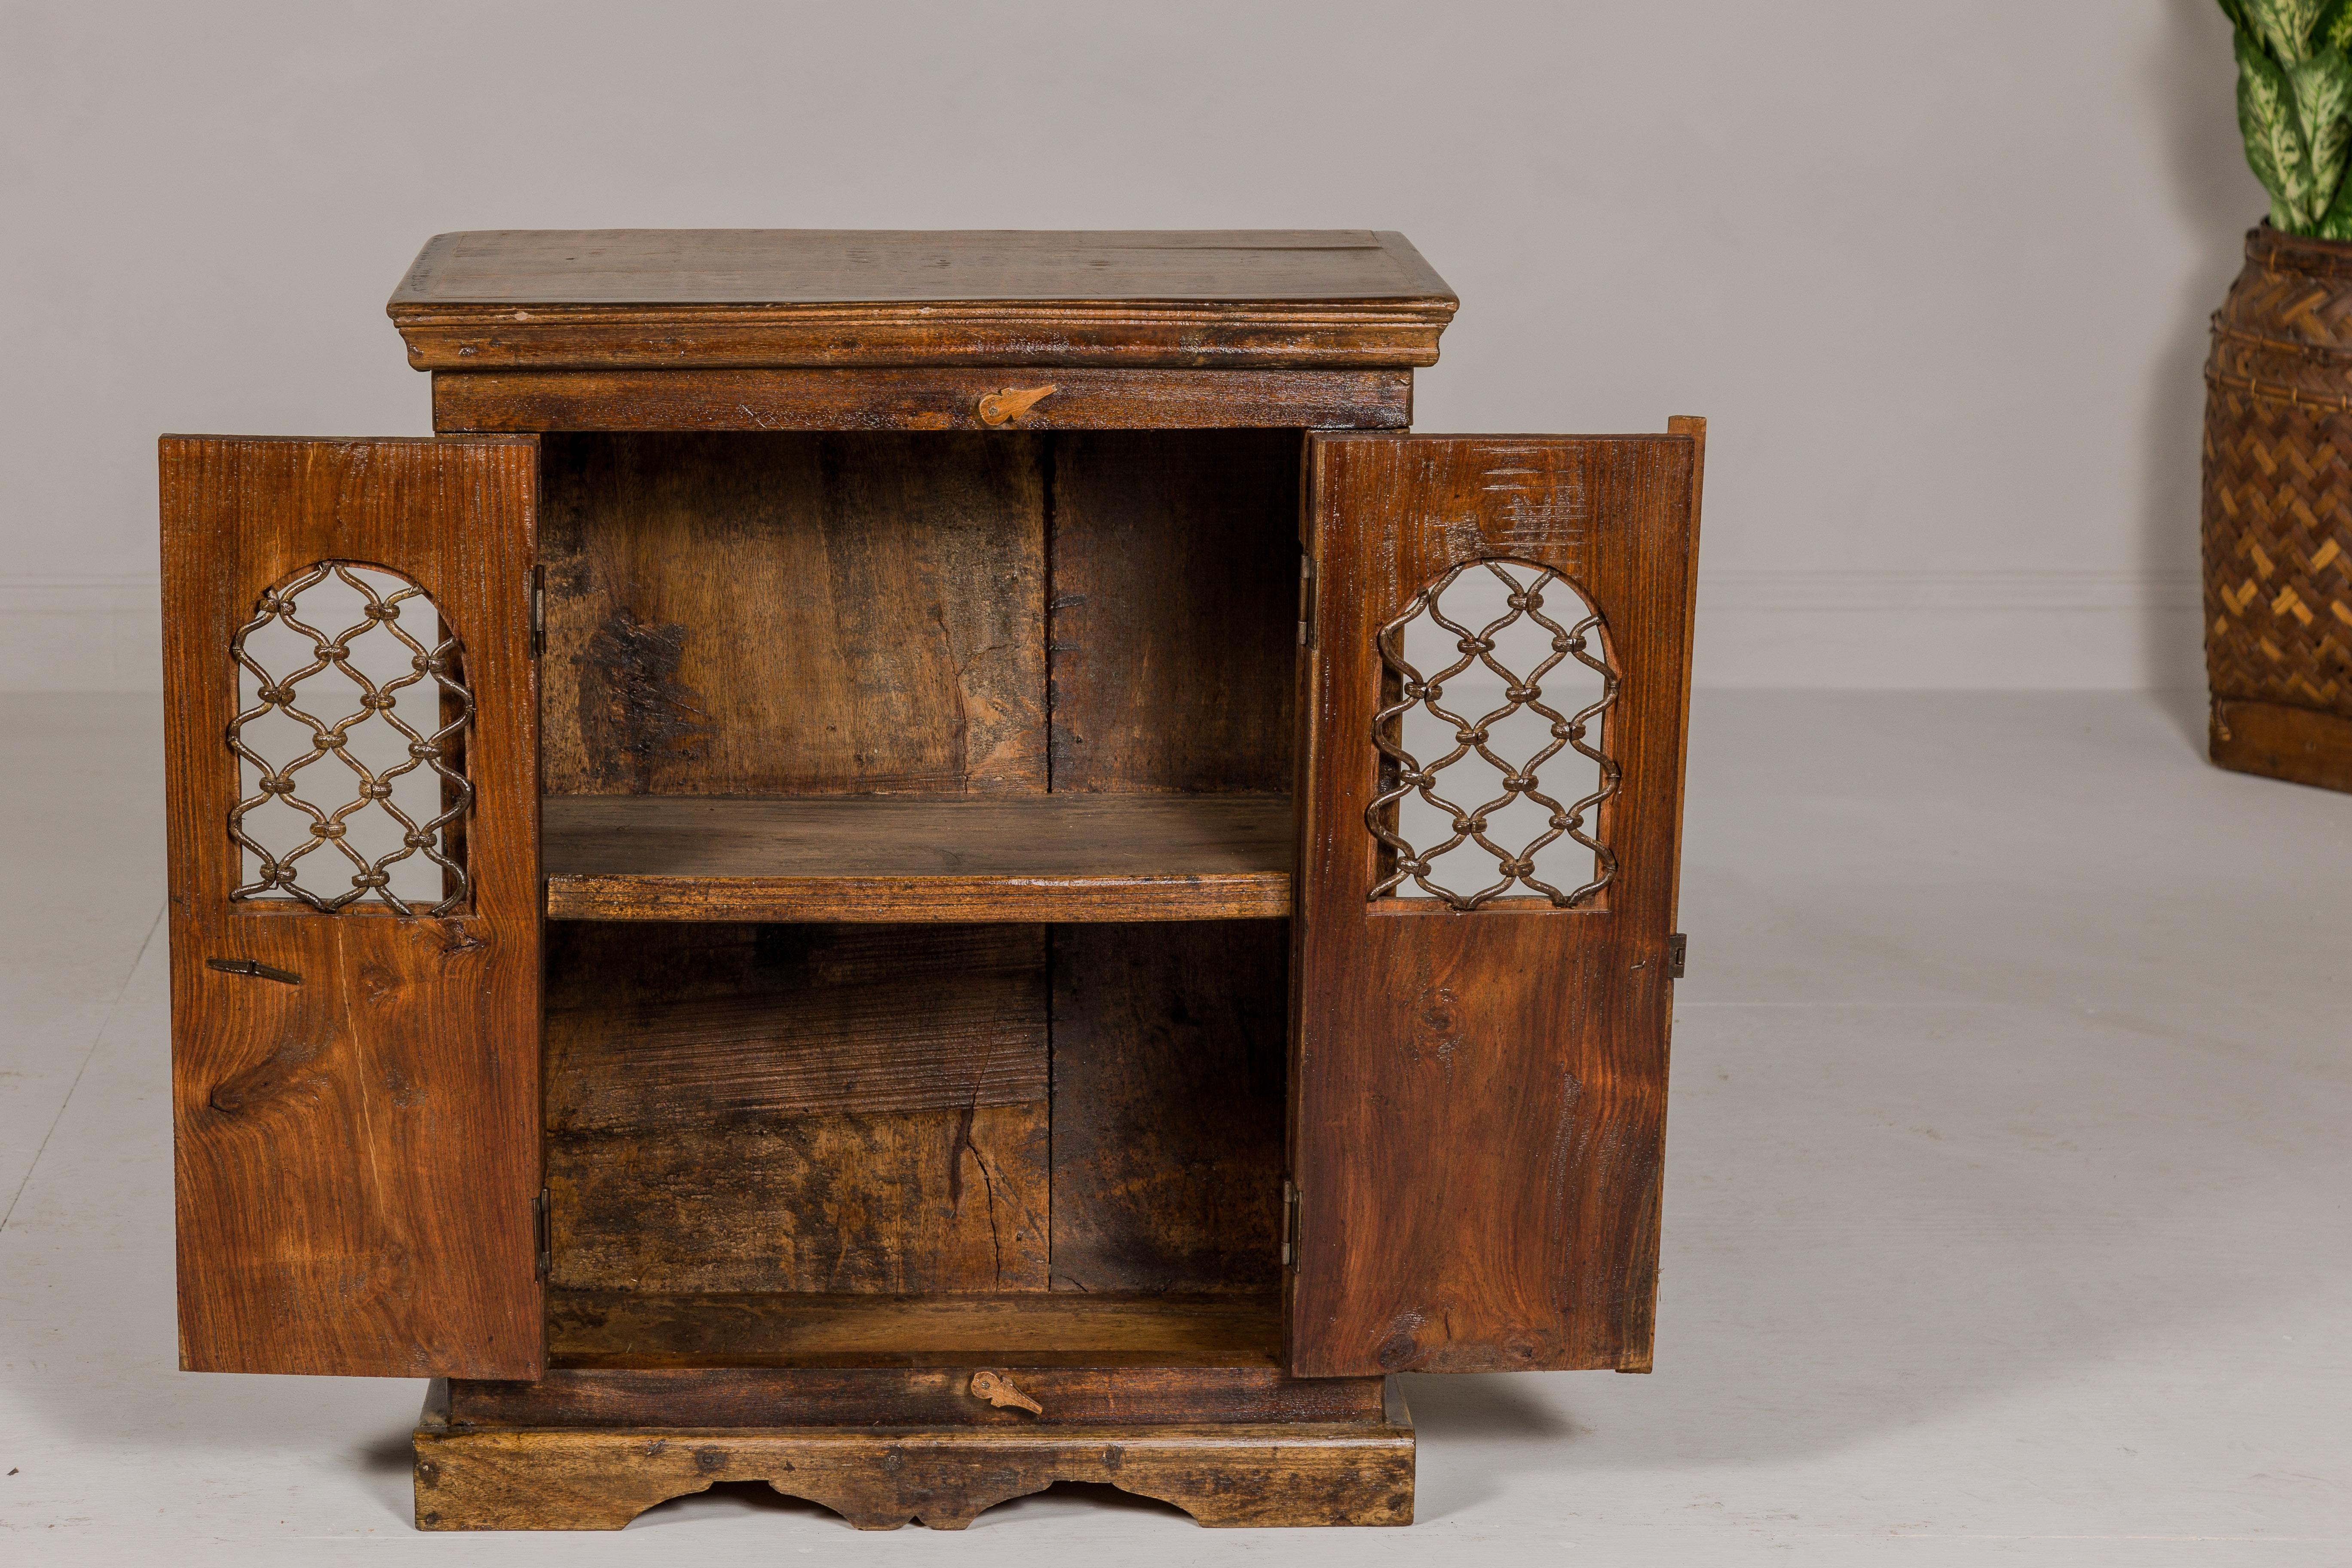 Indian 19th Century Wooden Side Cabinet with Arched Metal Grate Window Door For Sale 9